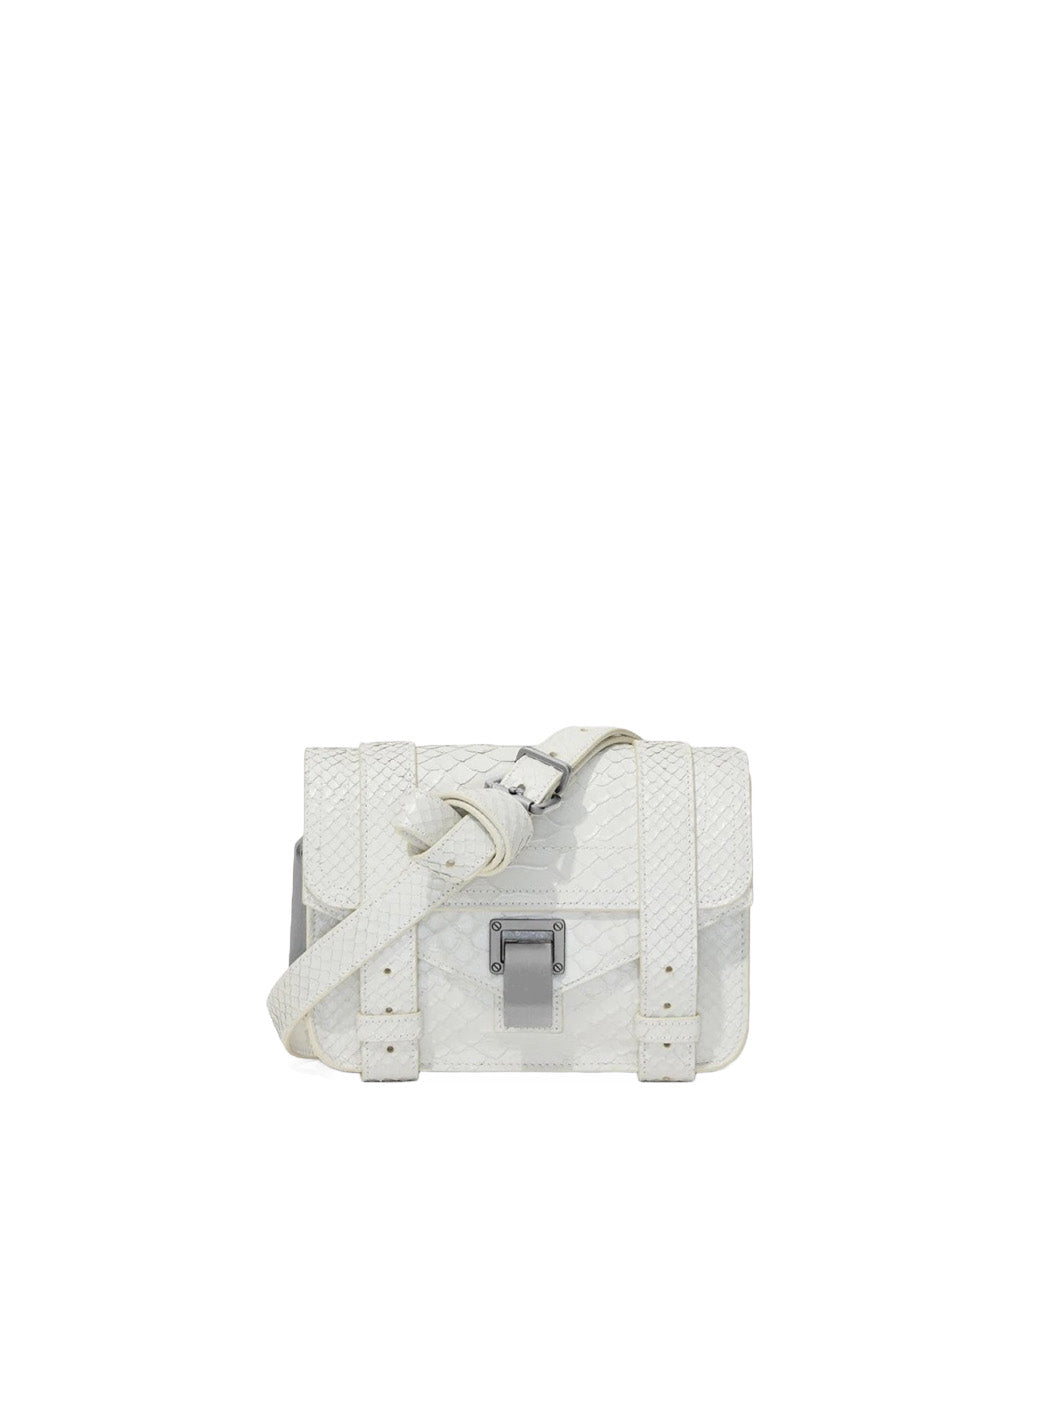 Carved Python PS1 Mini Crossbody Bag in Optic White